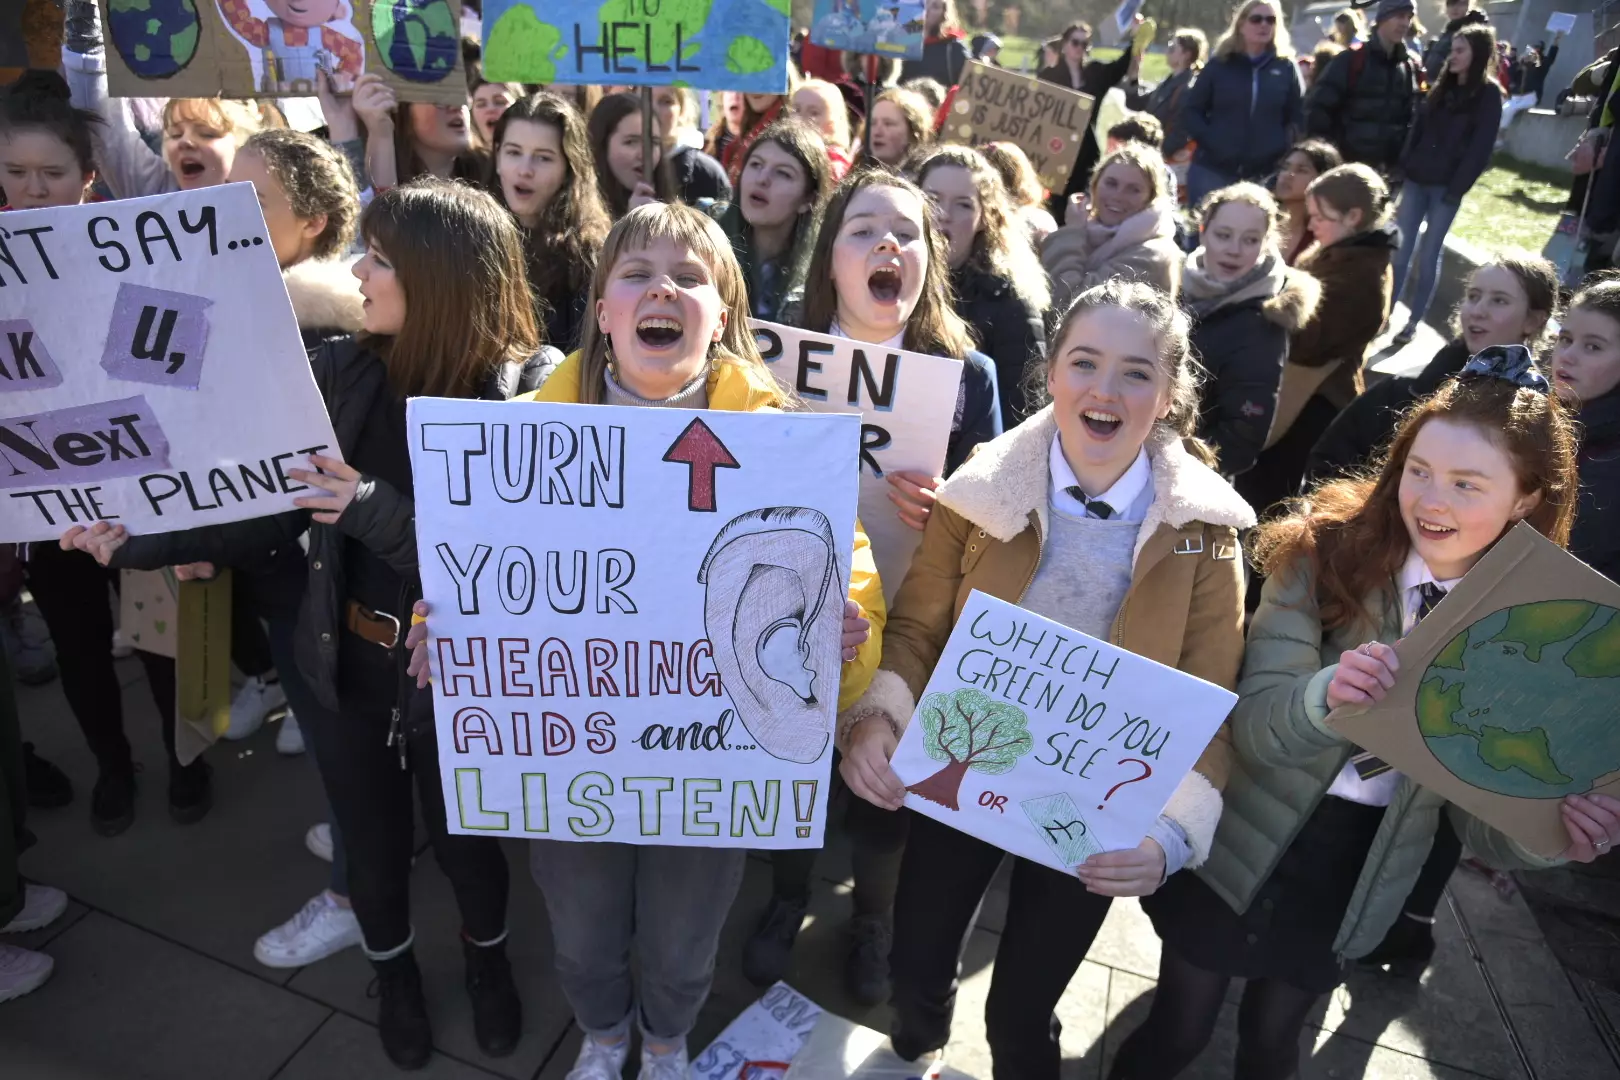 Pupils from schools across the world have come together to take part in 'youth strikes' over climate change.